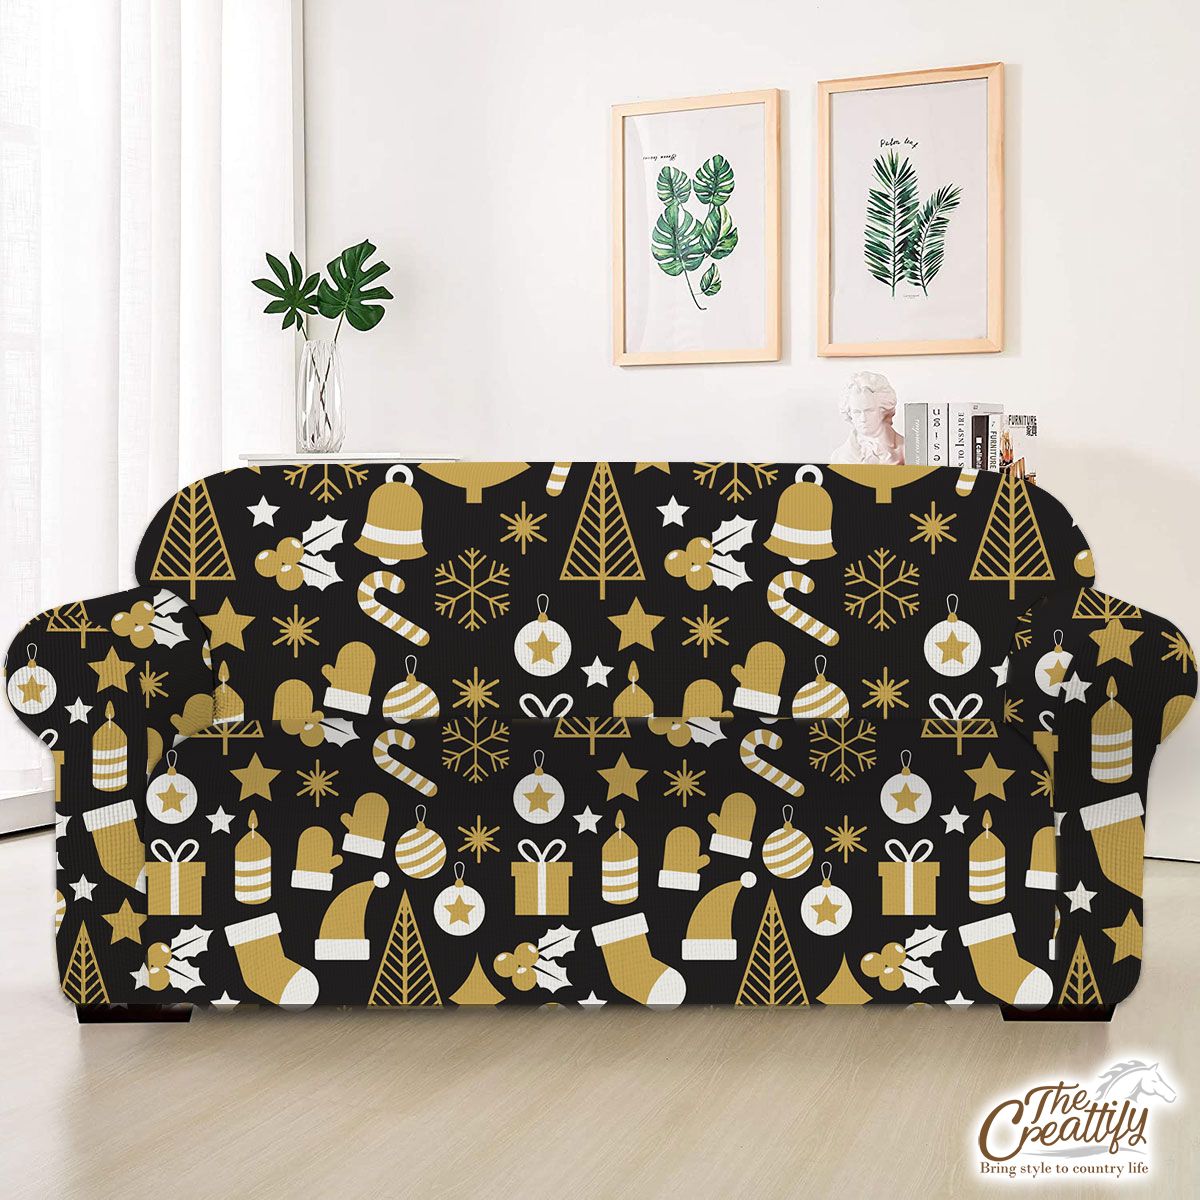 White And Gold Christmas Socks, Christmas Tree, Candy Cane On Black Background Sofa Cover